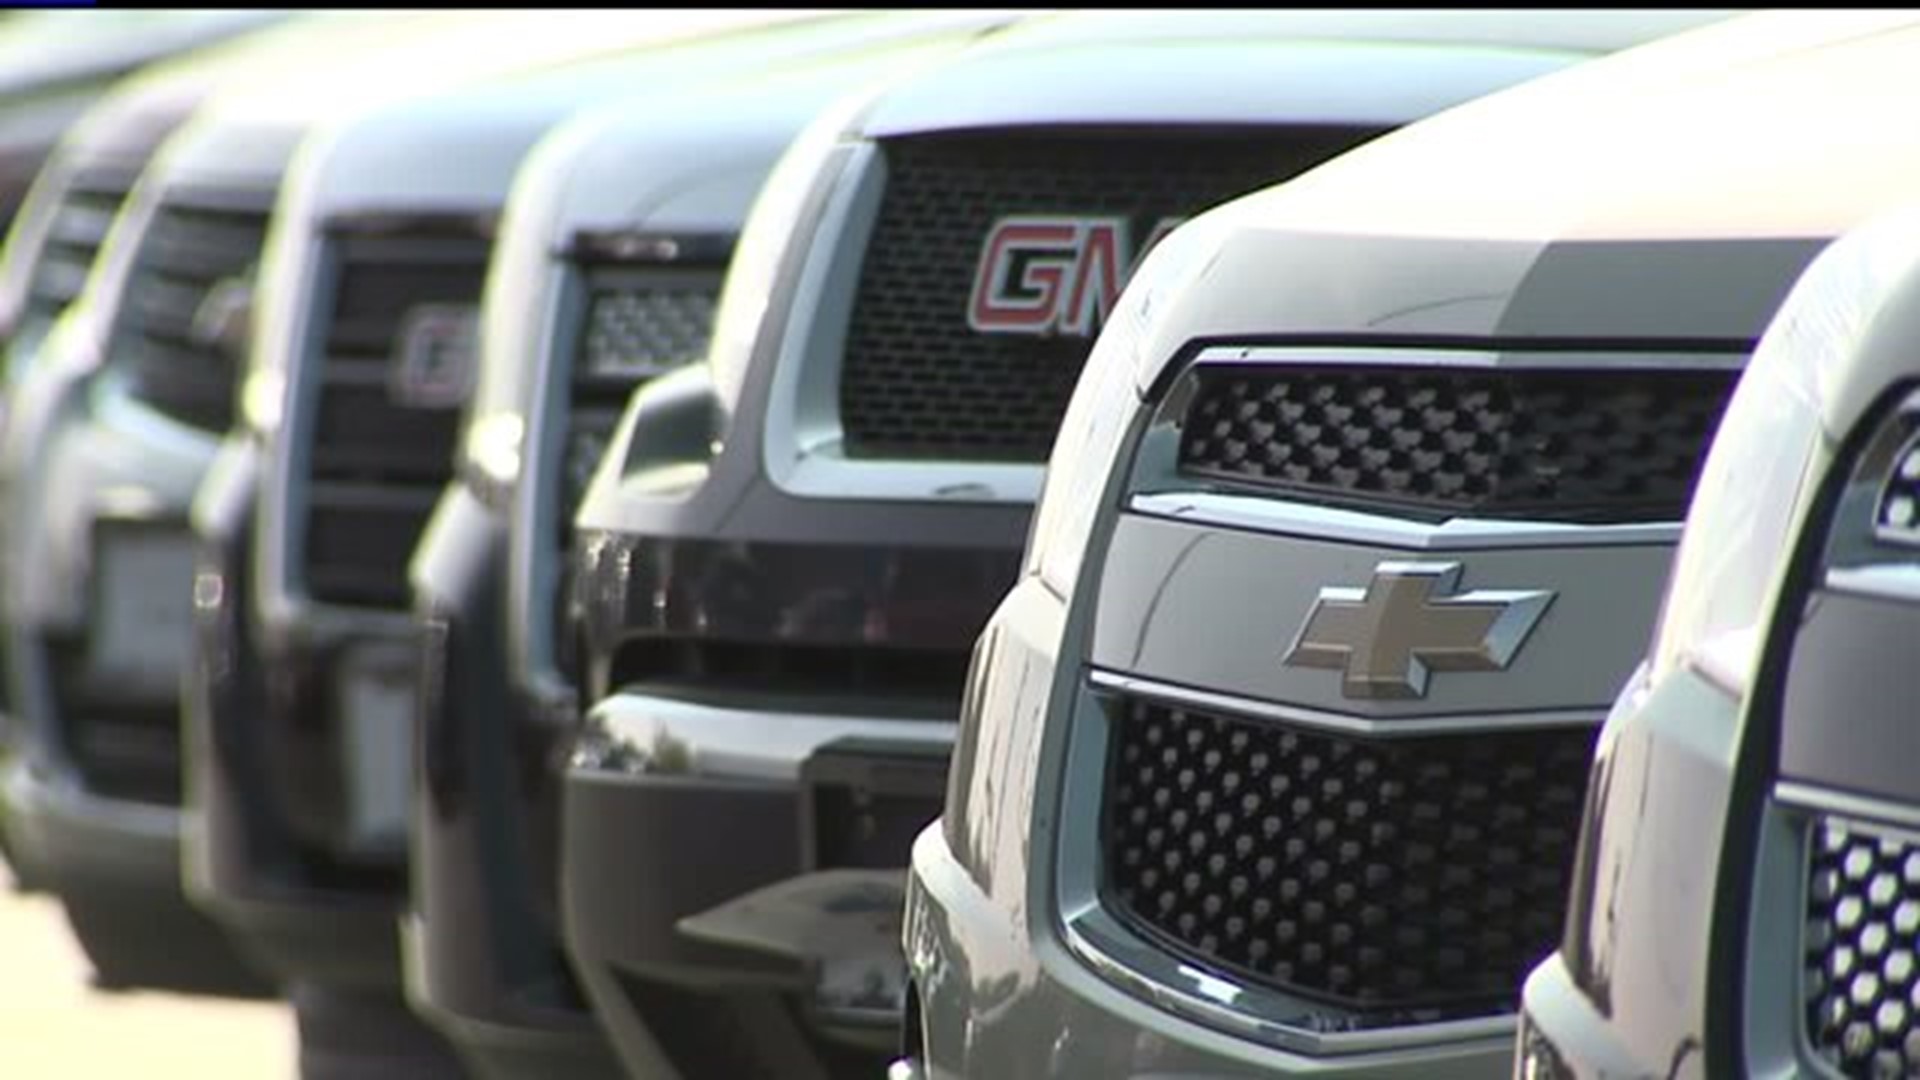 Mills Chevy moves to Davenport